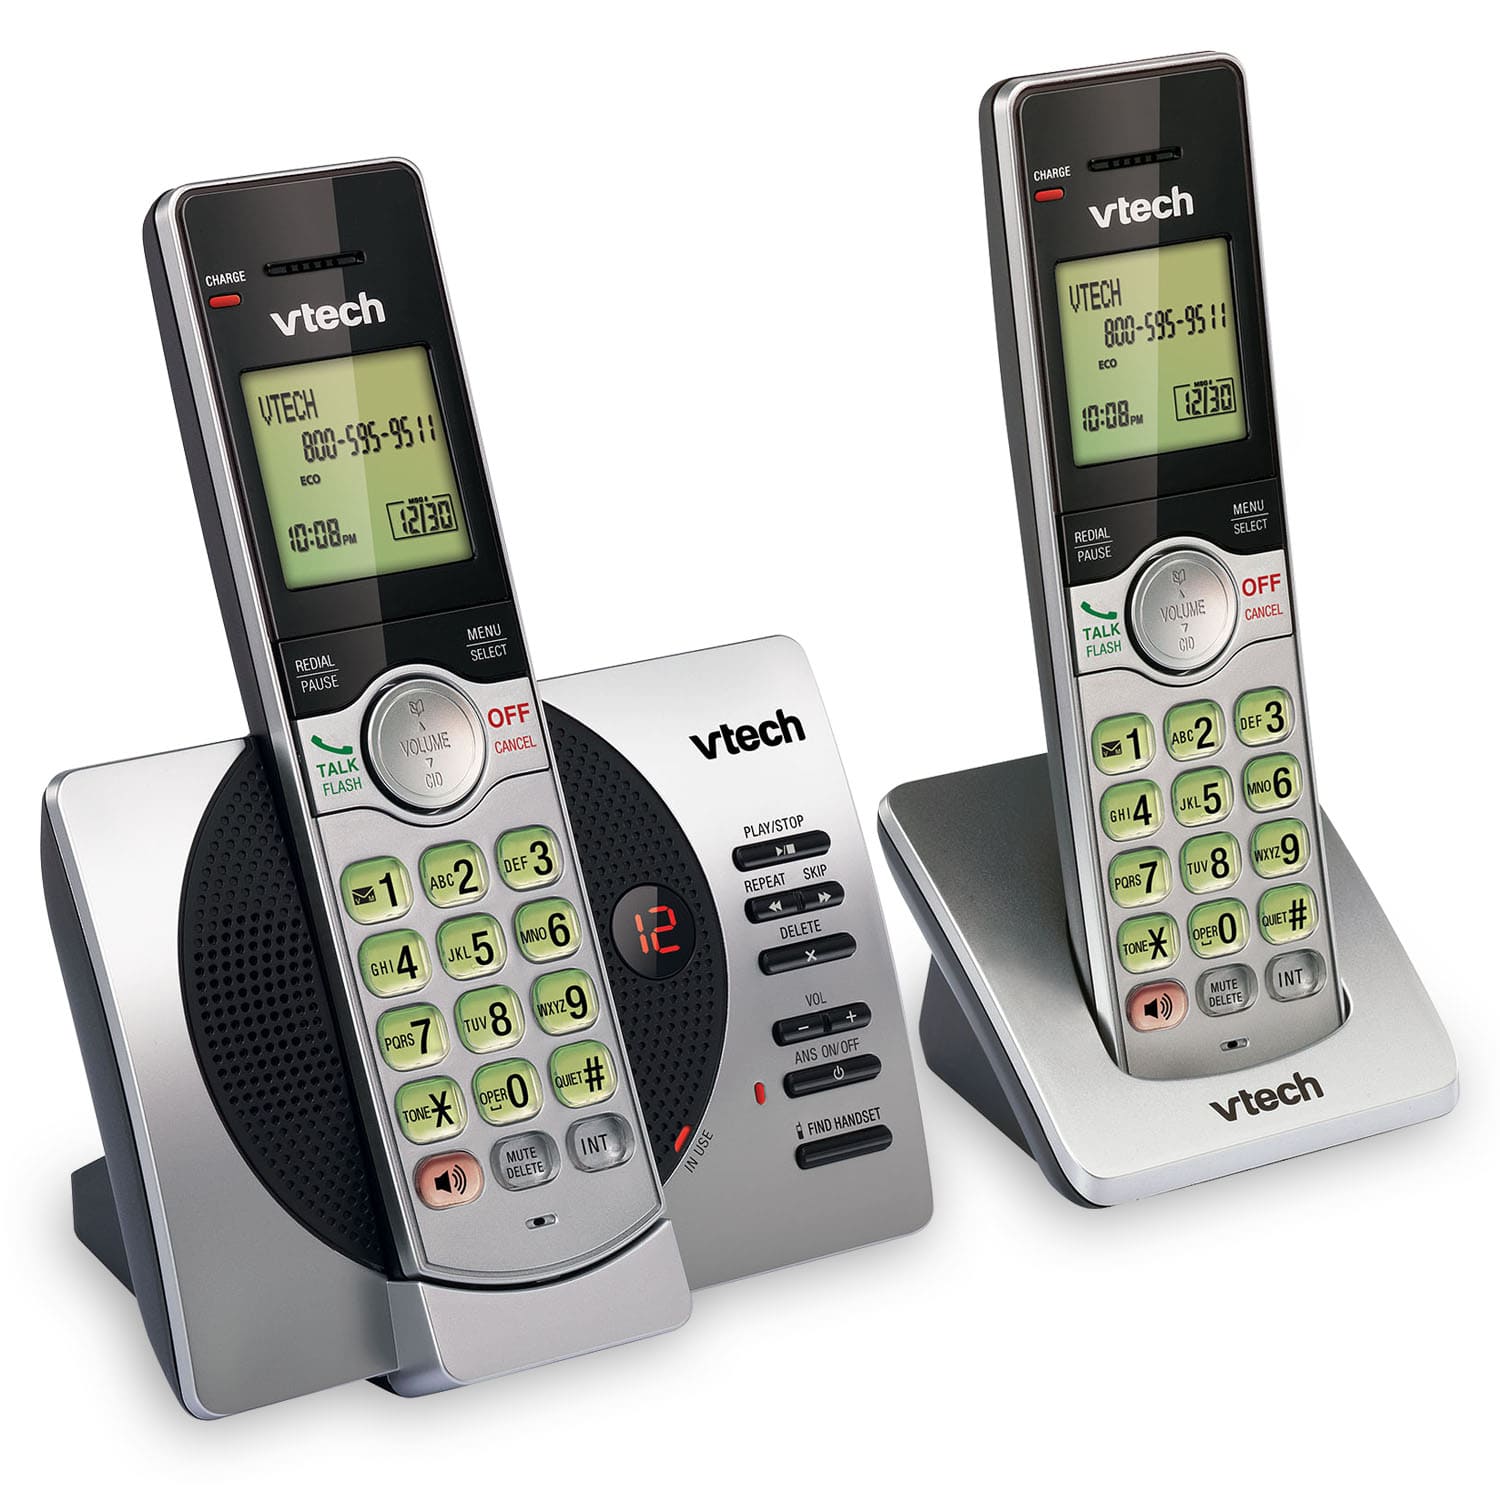 2 Handset Cordless Answering System with Caller ID/Call Waiting